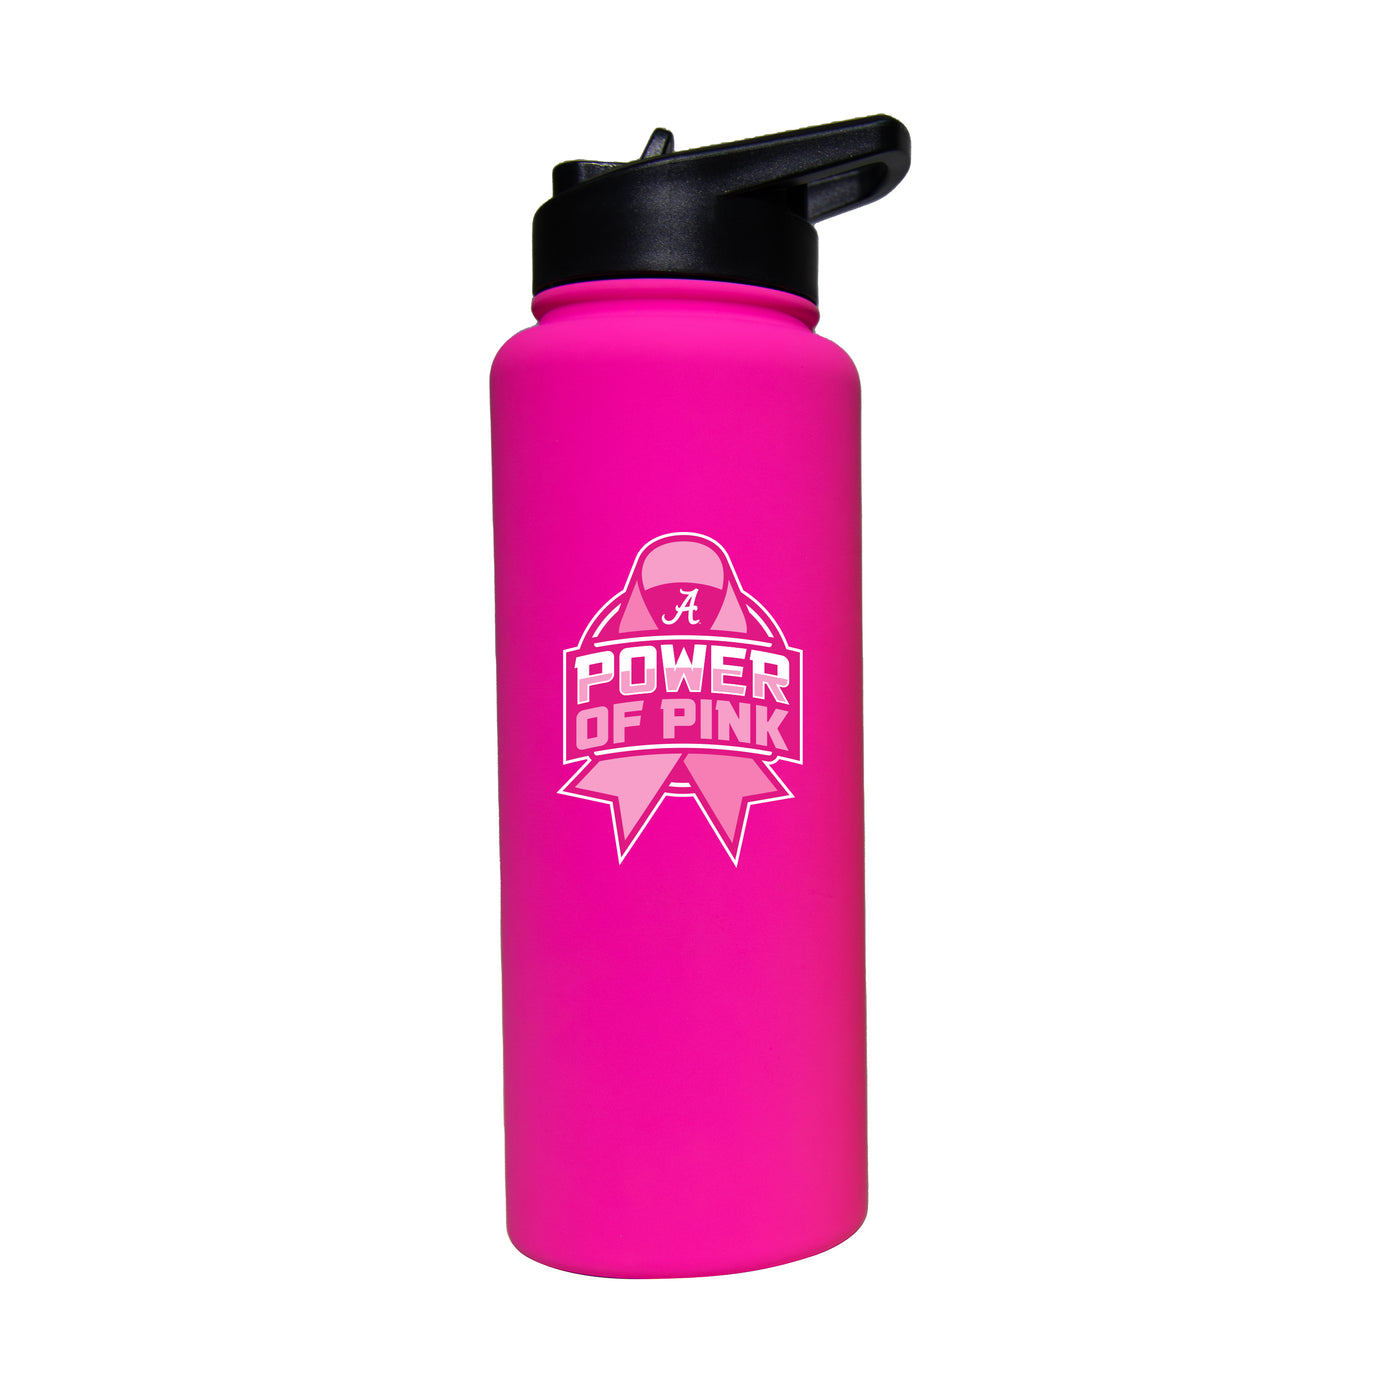 Alabama Power of Pink 34oz Soft Touch Quencher